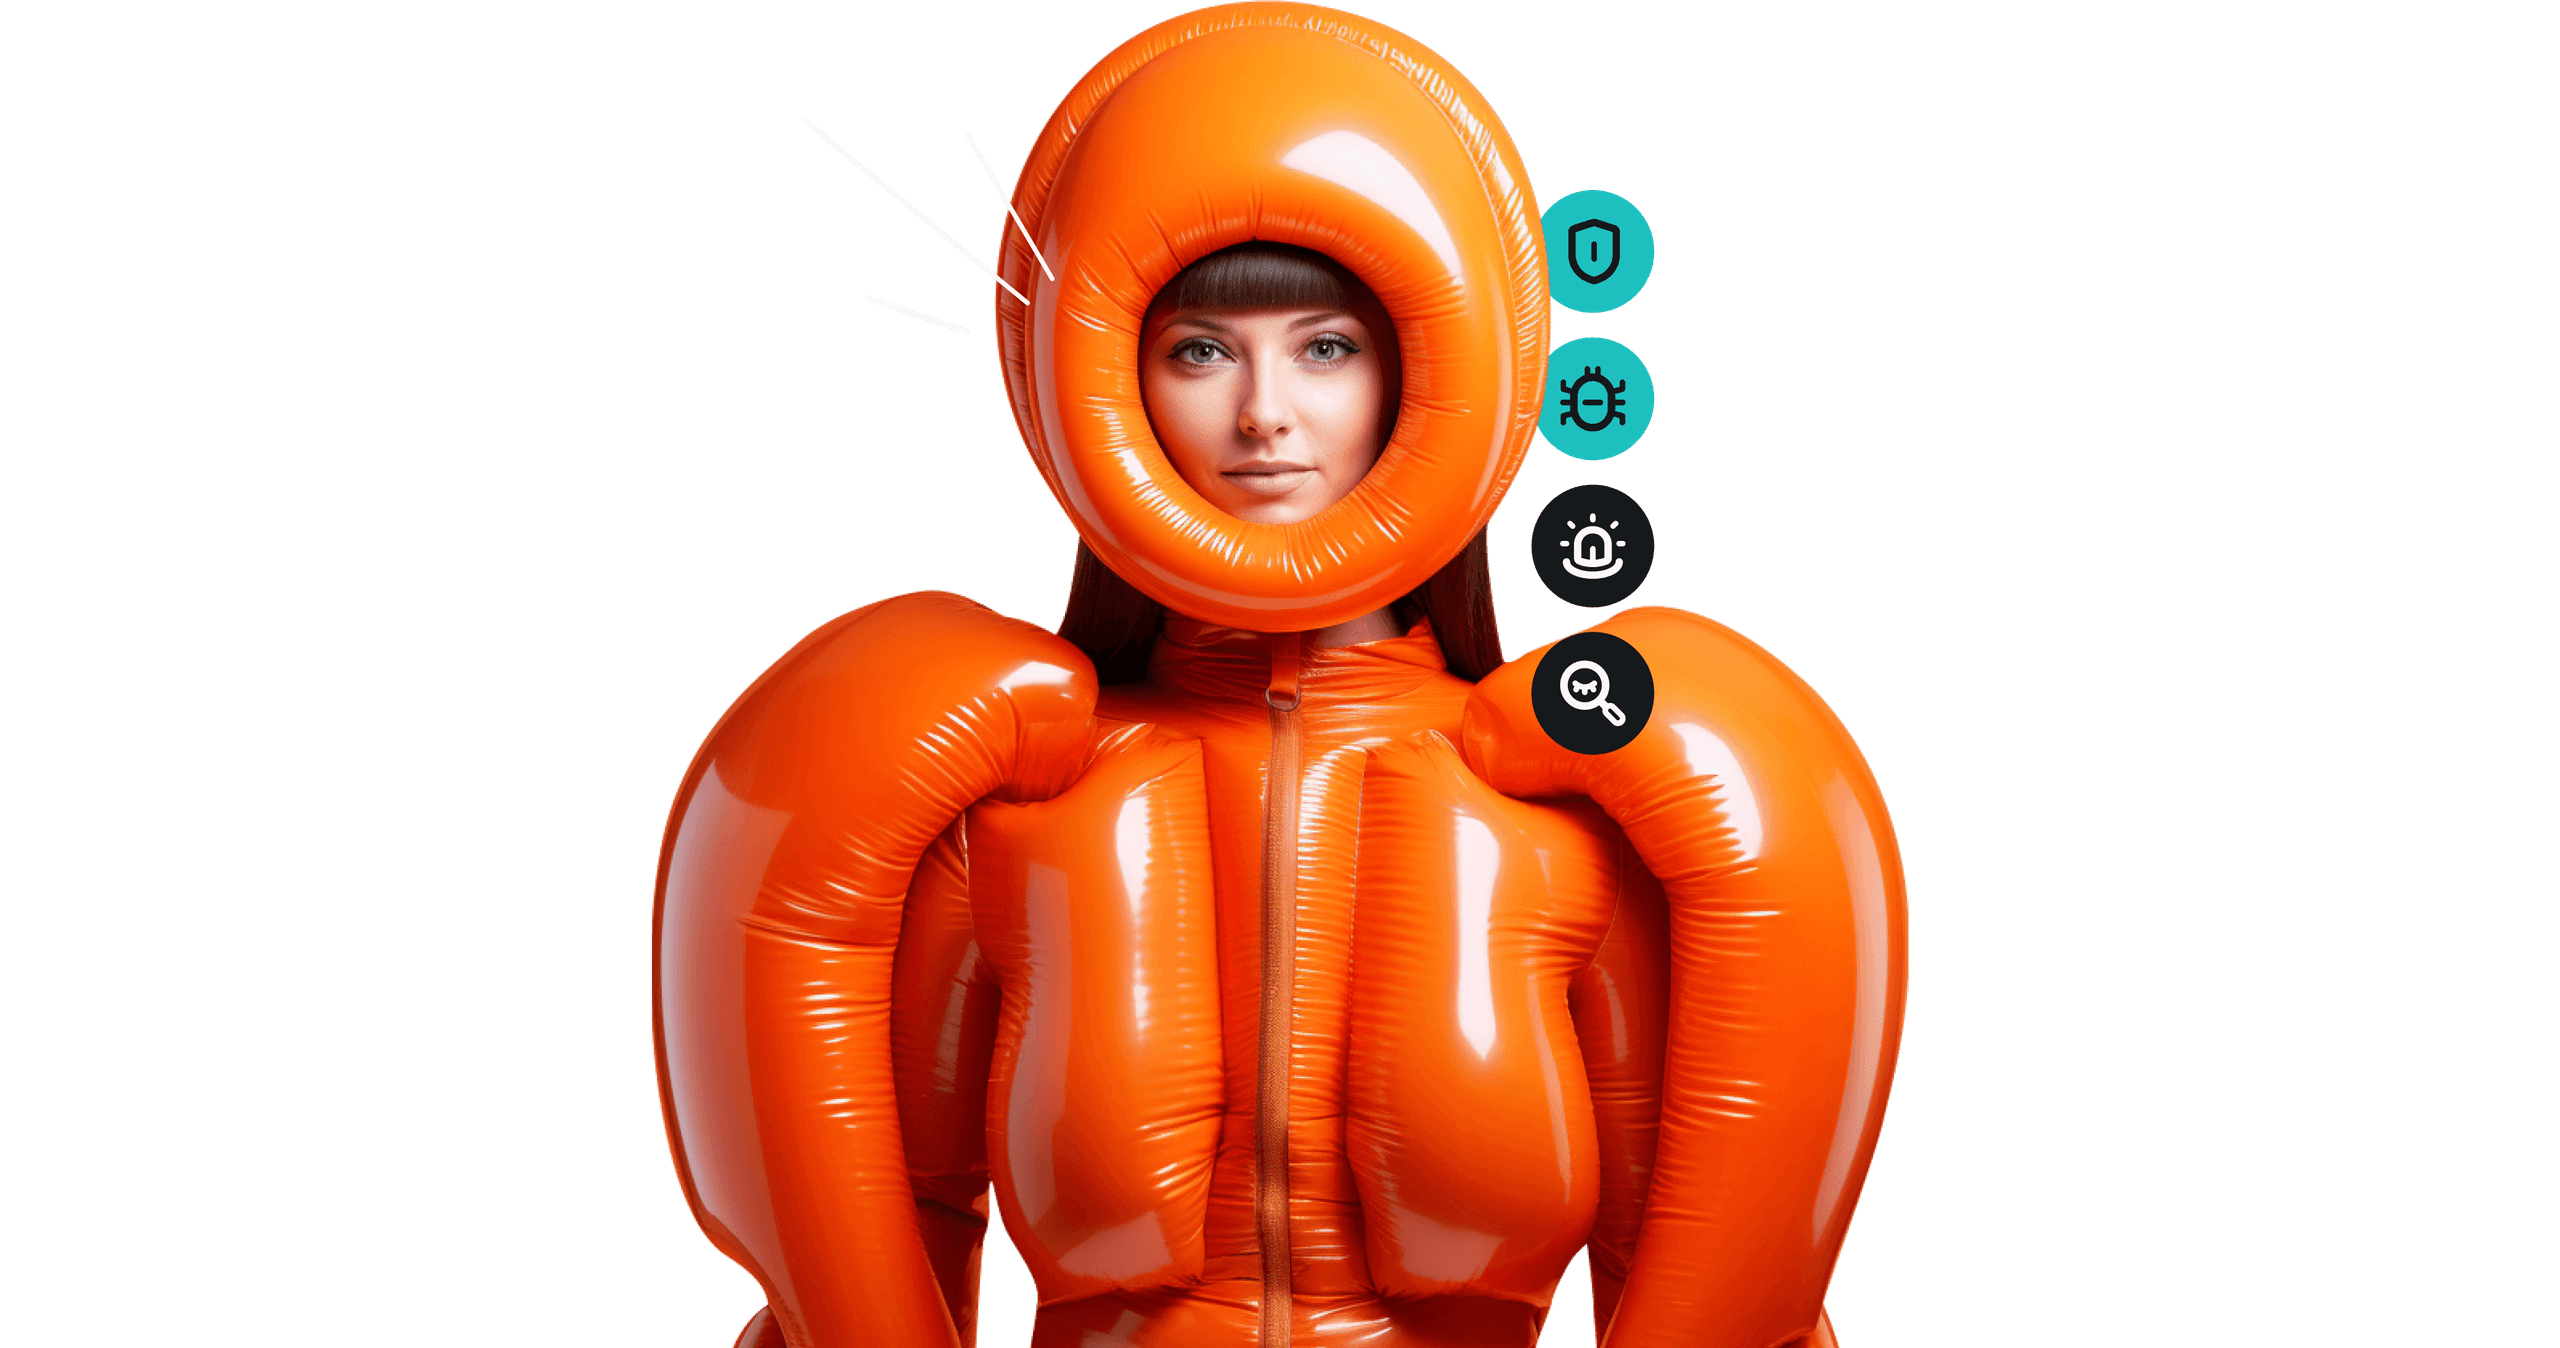 A woman in an orange balloon suit and a balloon helmet.